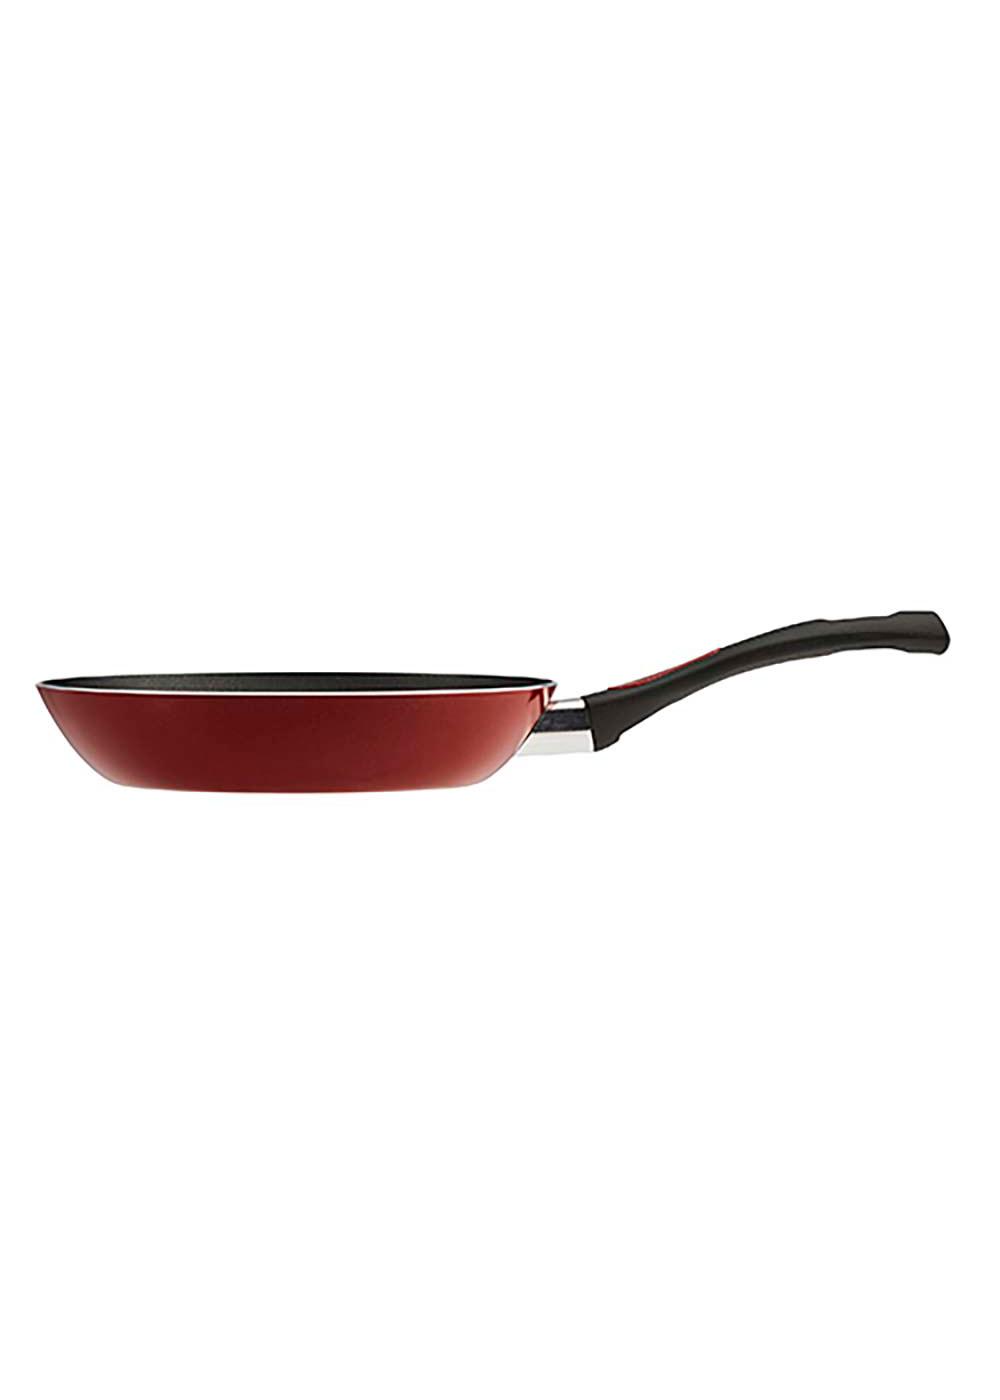 Tramontina Non-Stick Red Cookware Set; image 13 of 14